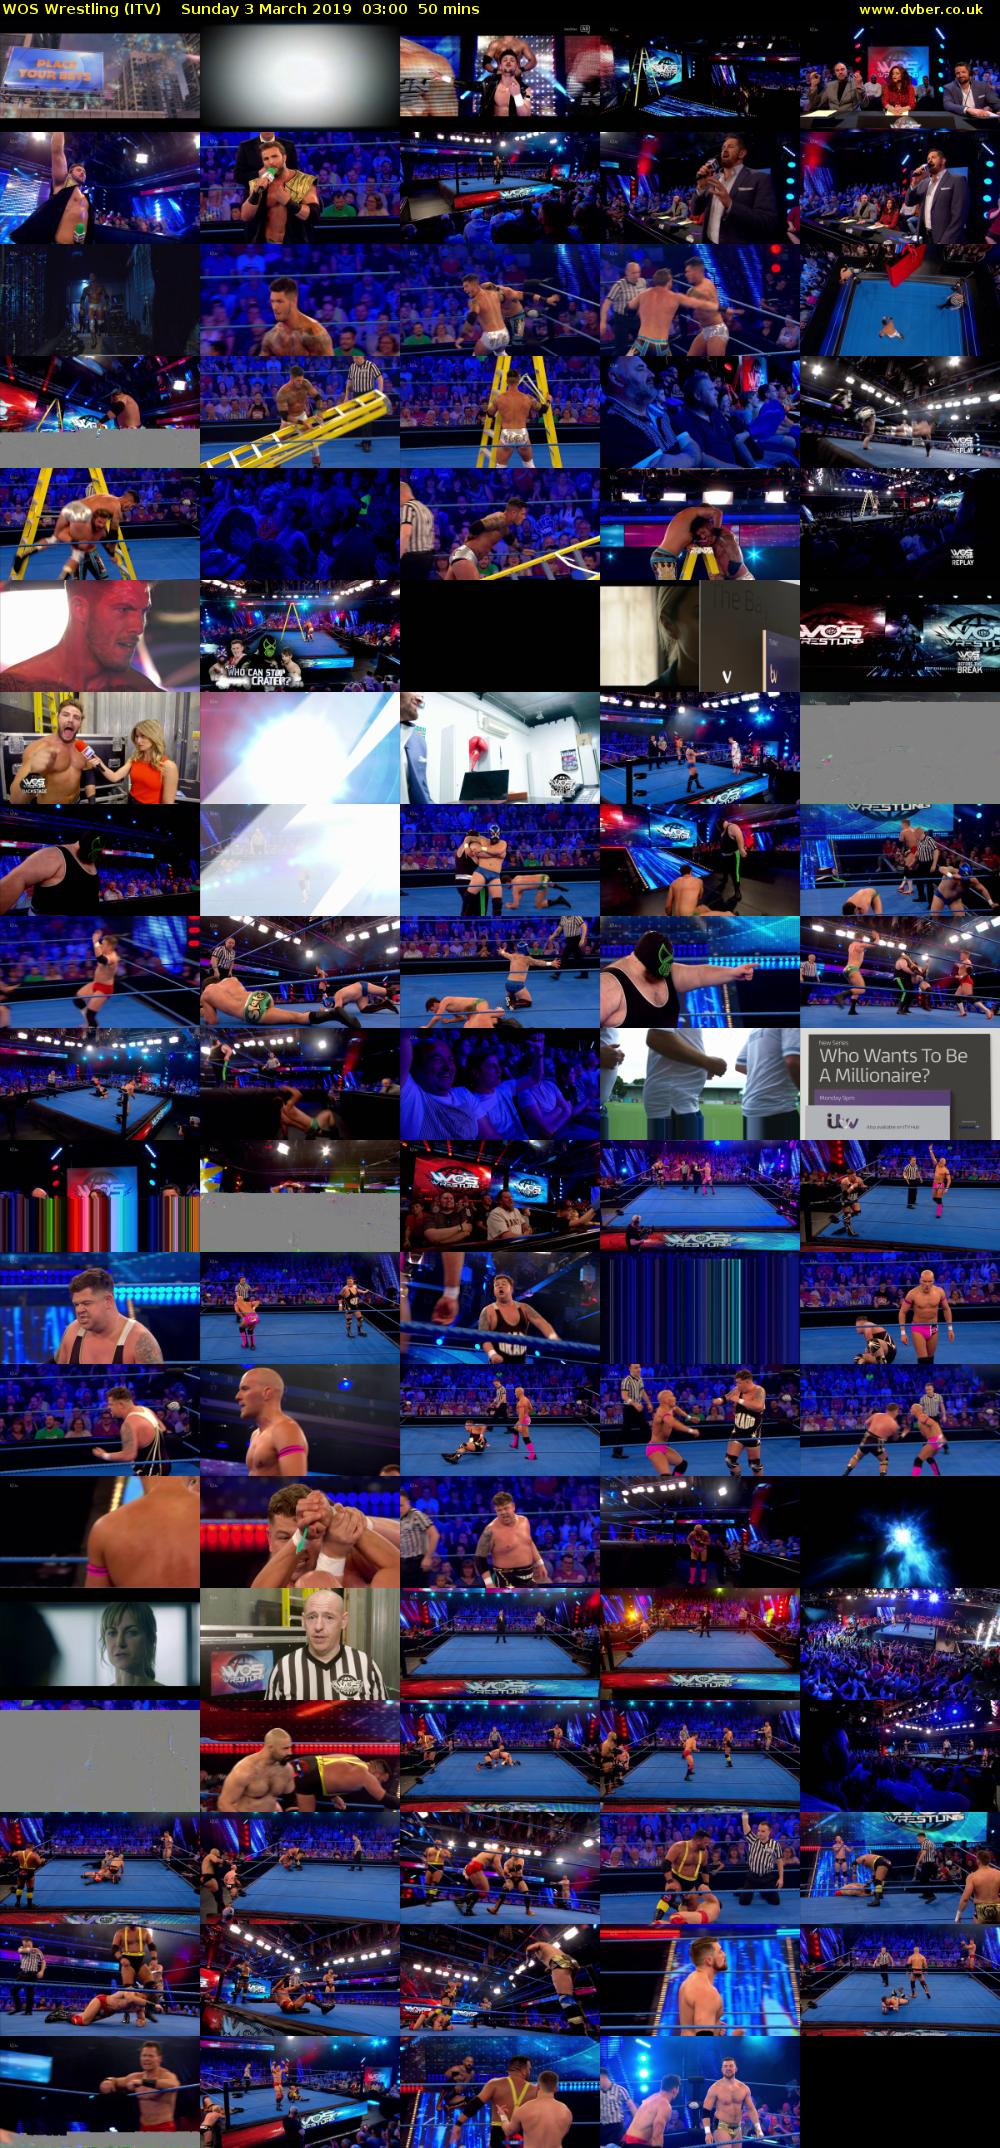 WOS Wrestling (ITV) Sunday 3 March 2019 03:00 - 03:50